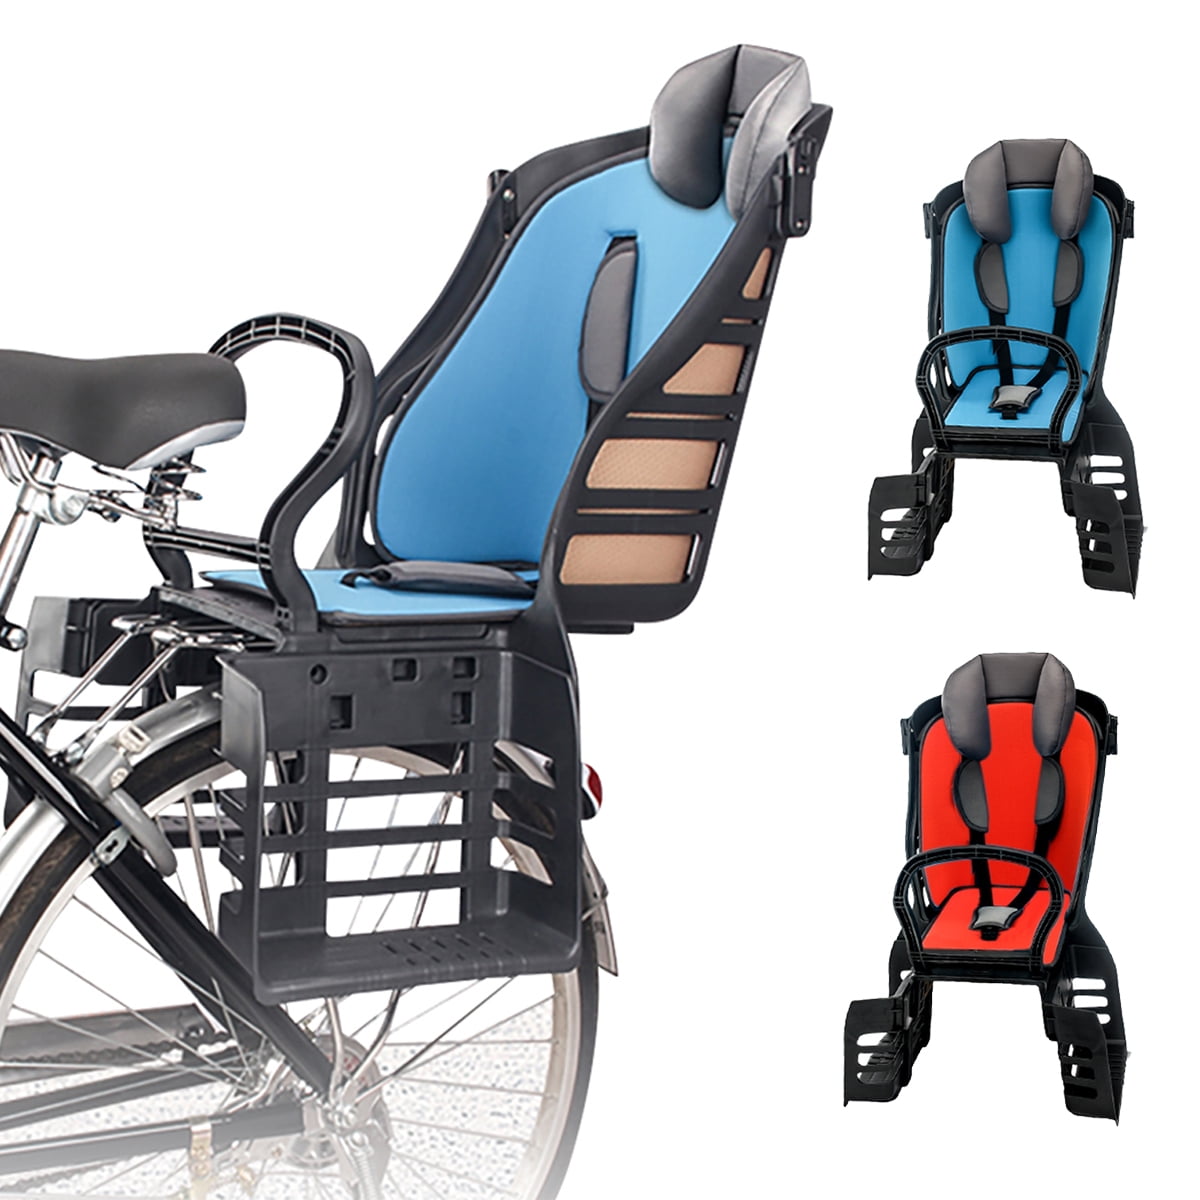 Thicken Armrest,Cushion and Backrest Adjustable and Detachable Bike Seat XIEEIX Child Rear Child Bike Seat Back Mounted Kids Carrier Bicycle Seat Including Footrest 